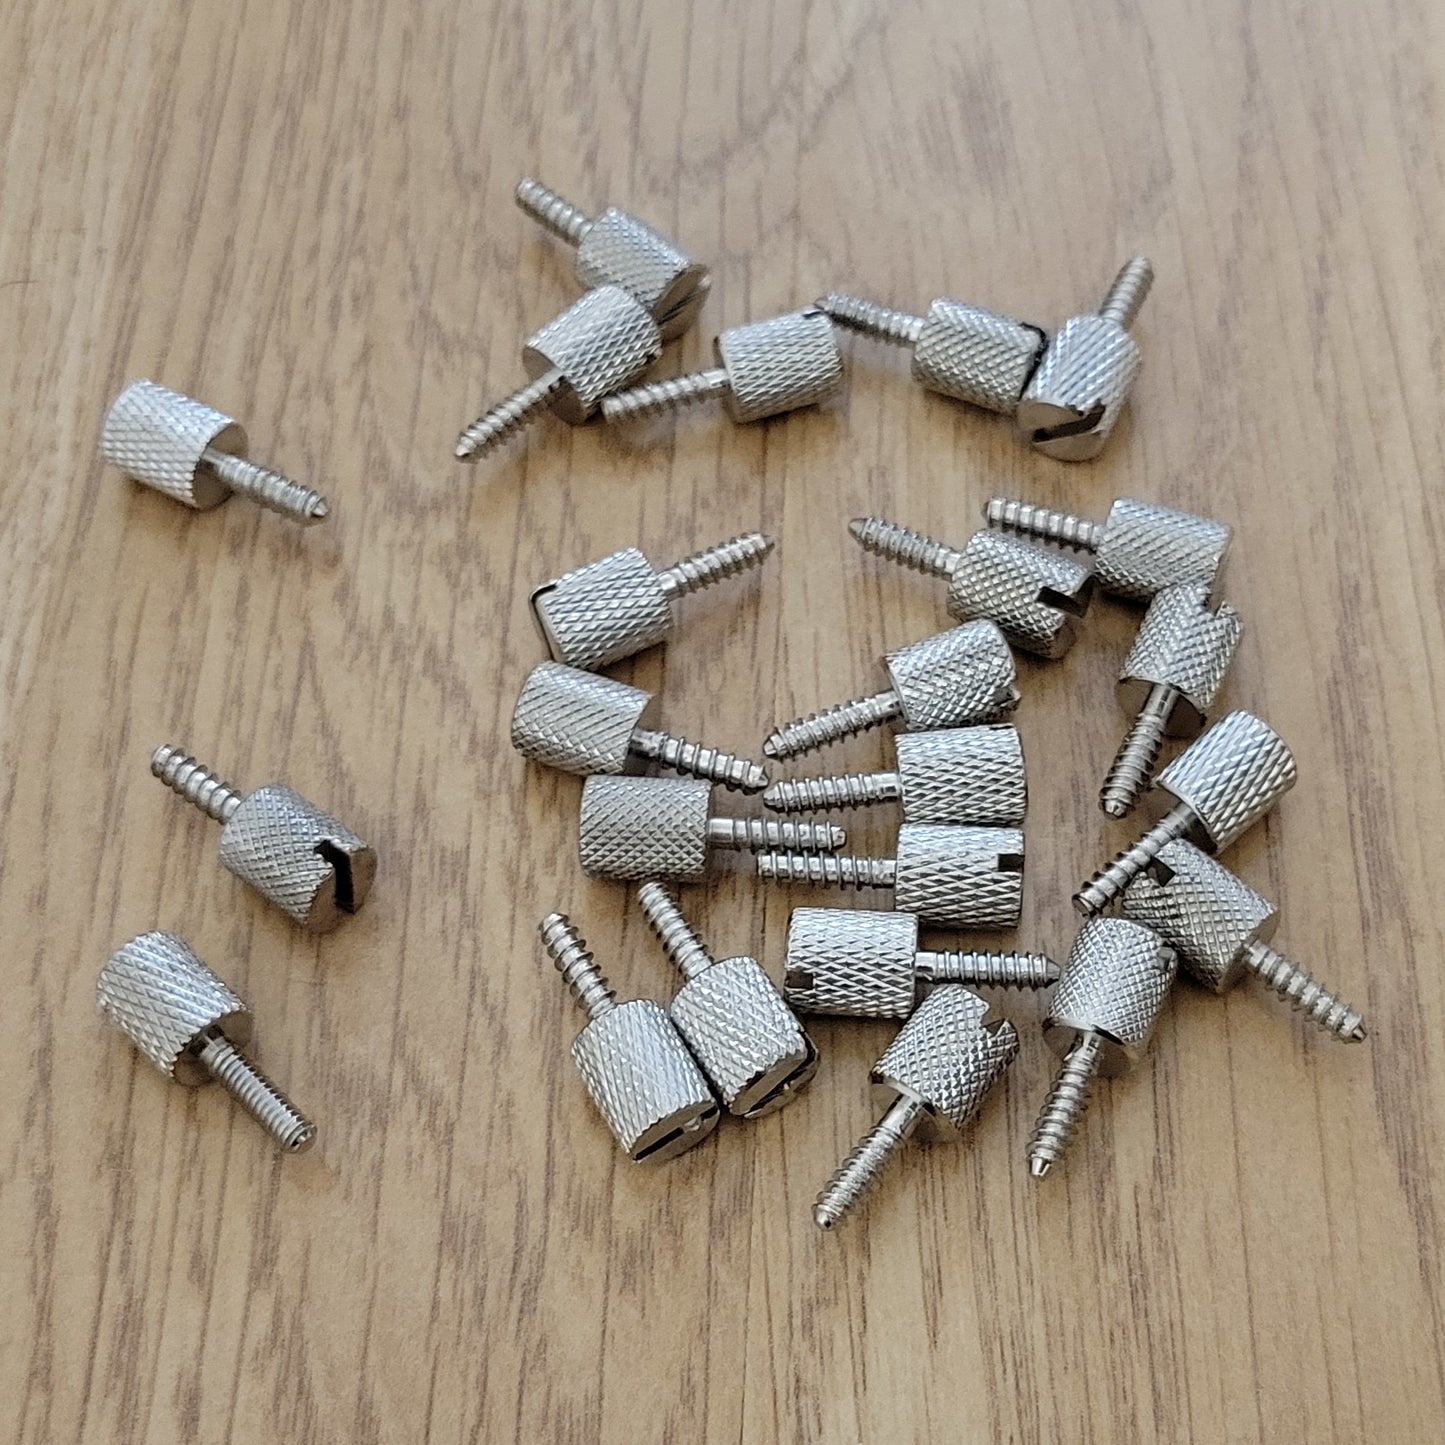 Scalextric Base Screws To Hold Cars In Position In Crystal Cases - 24 Long